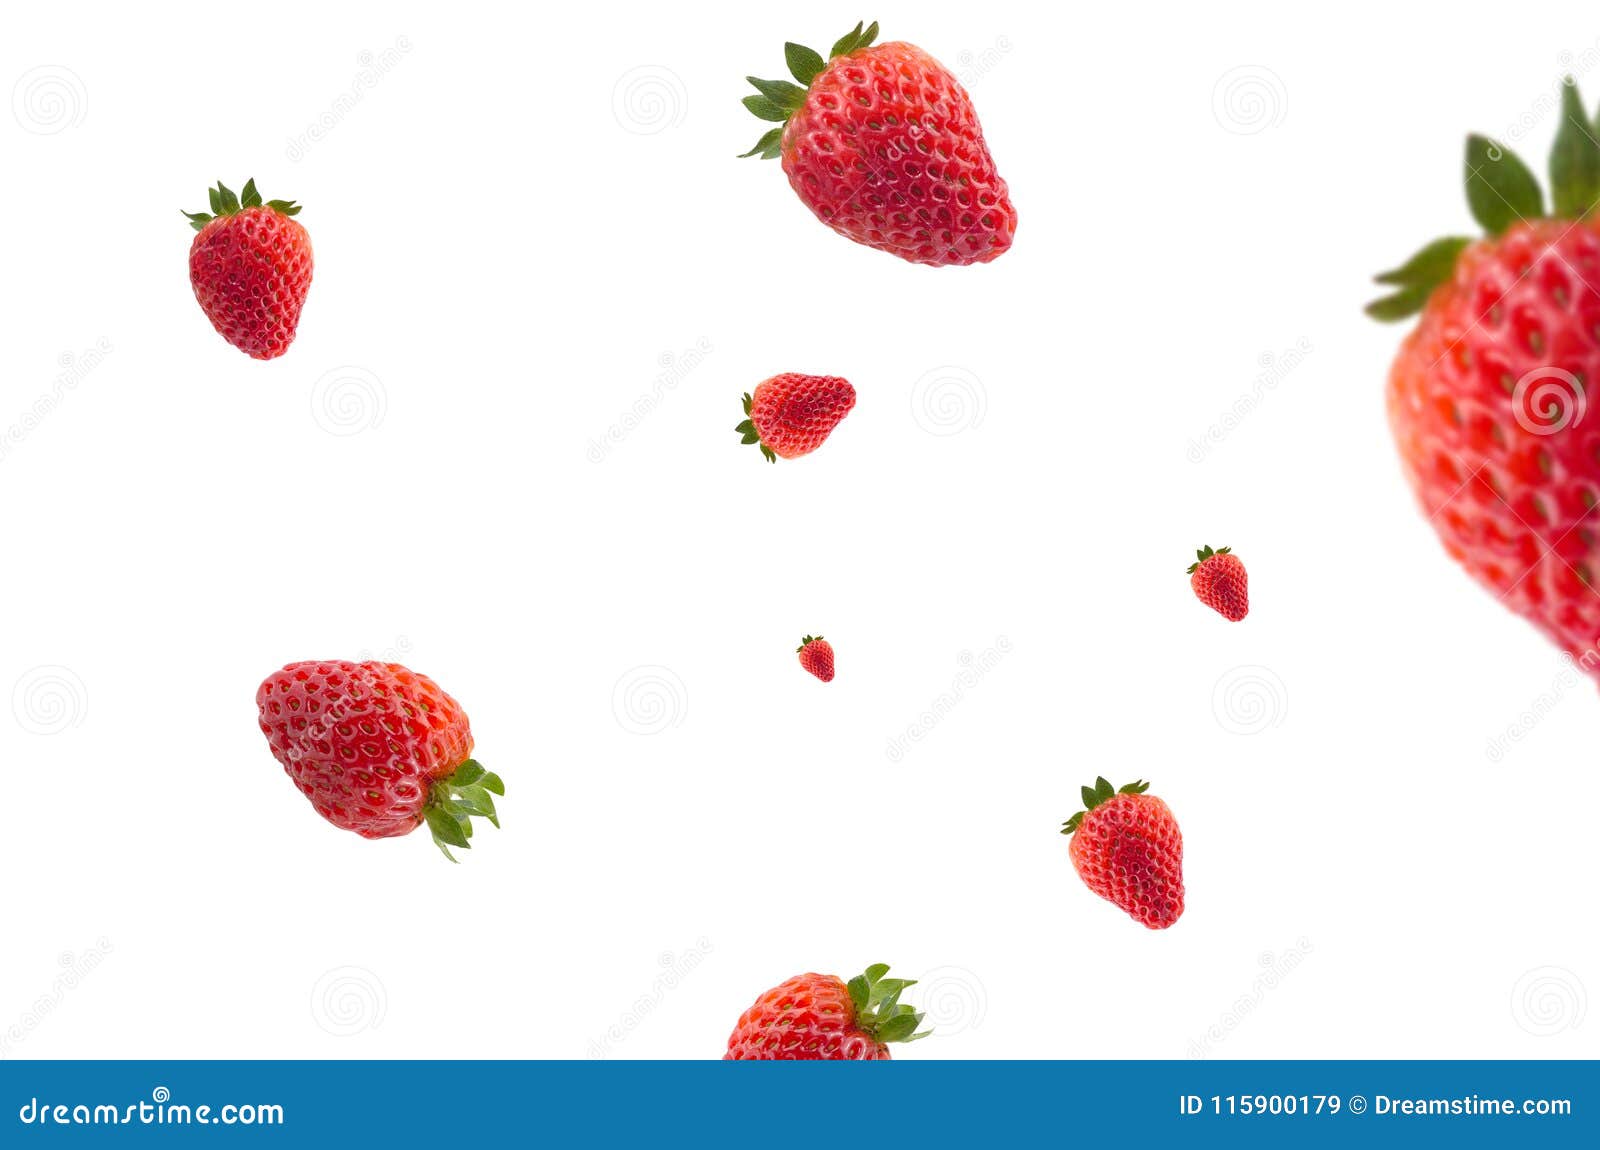 strawberries in the air